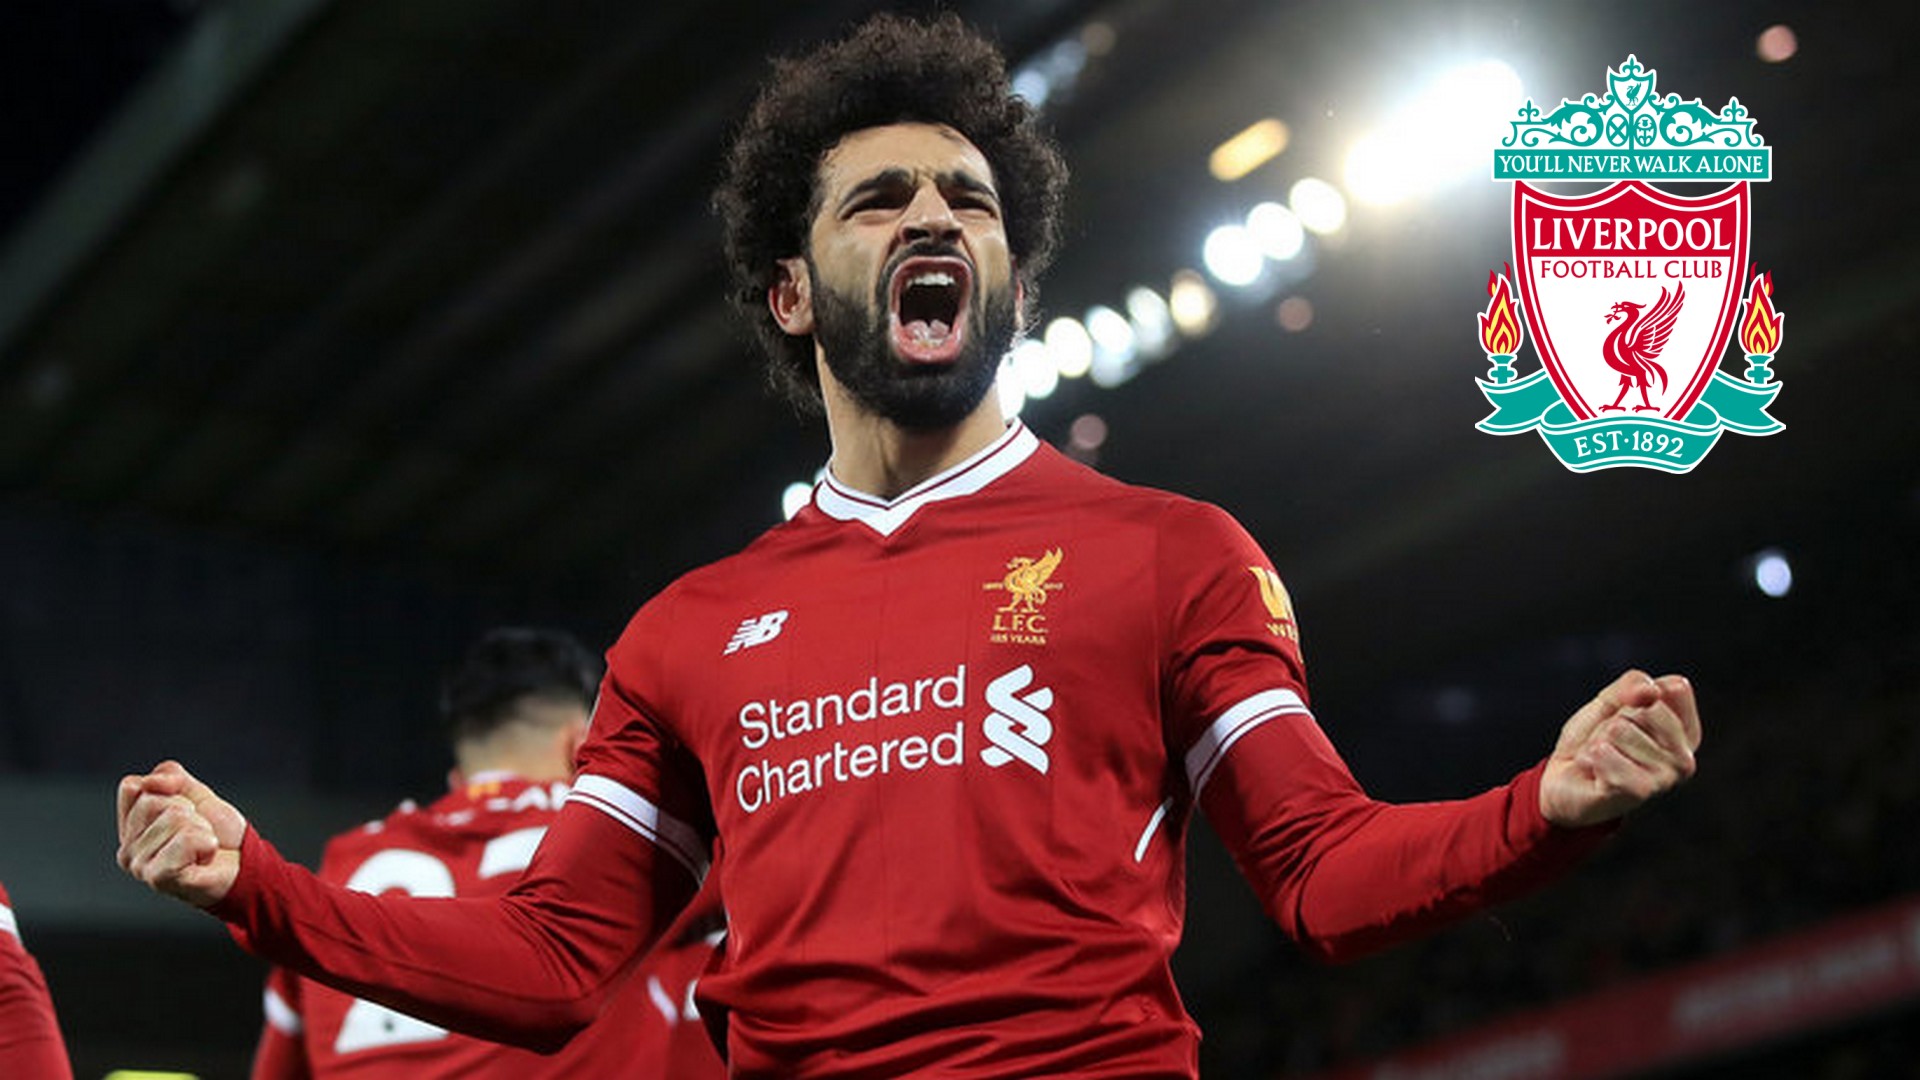 Liverpool Mohamed Salah Wallpaper with image resolution 1920x1080 pixel. You can use this wallpaper as background for your desktop Computer Screensavers, Android or iPhone smartphones